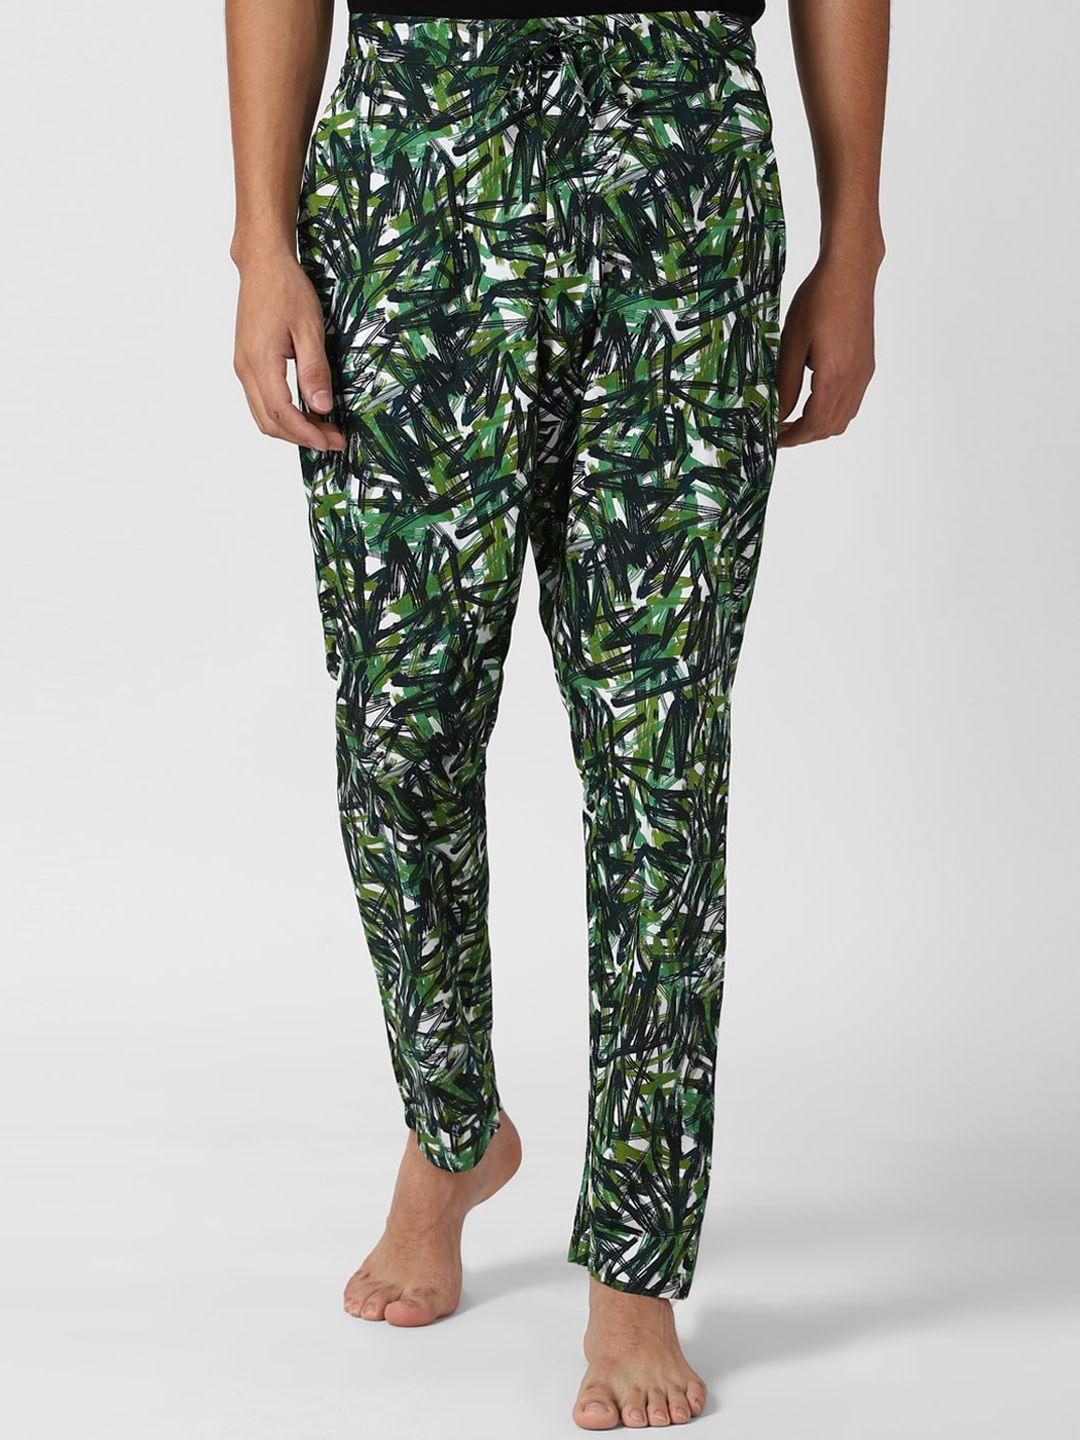 peter-england-men-green-&-white-printed-pure-cotton-loose-fit-lounge-pants